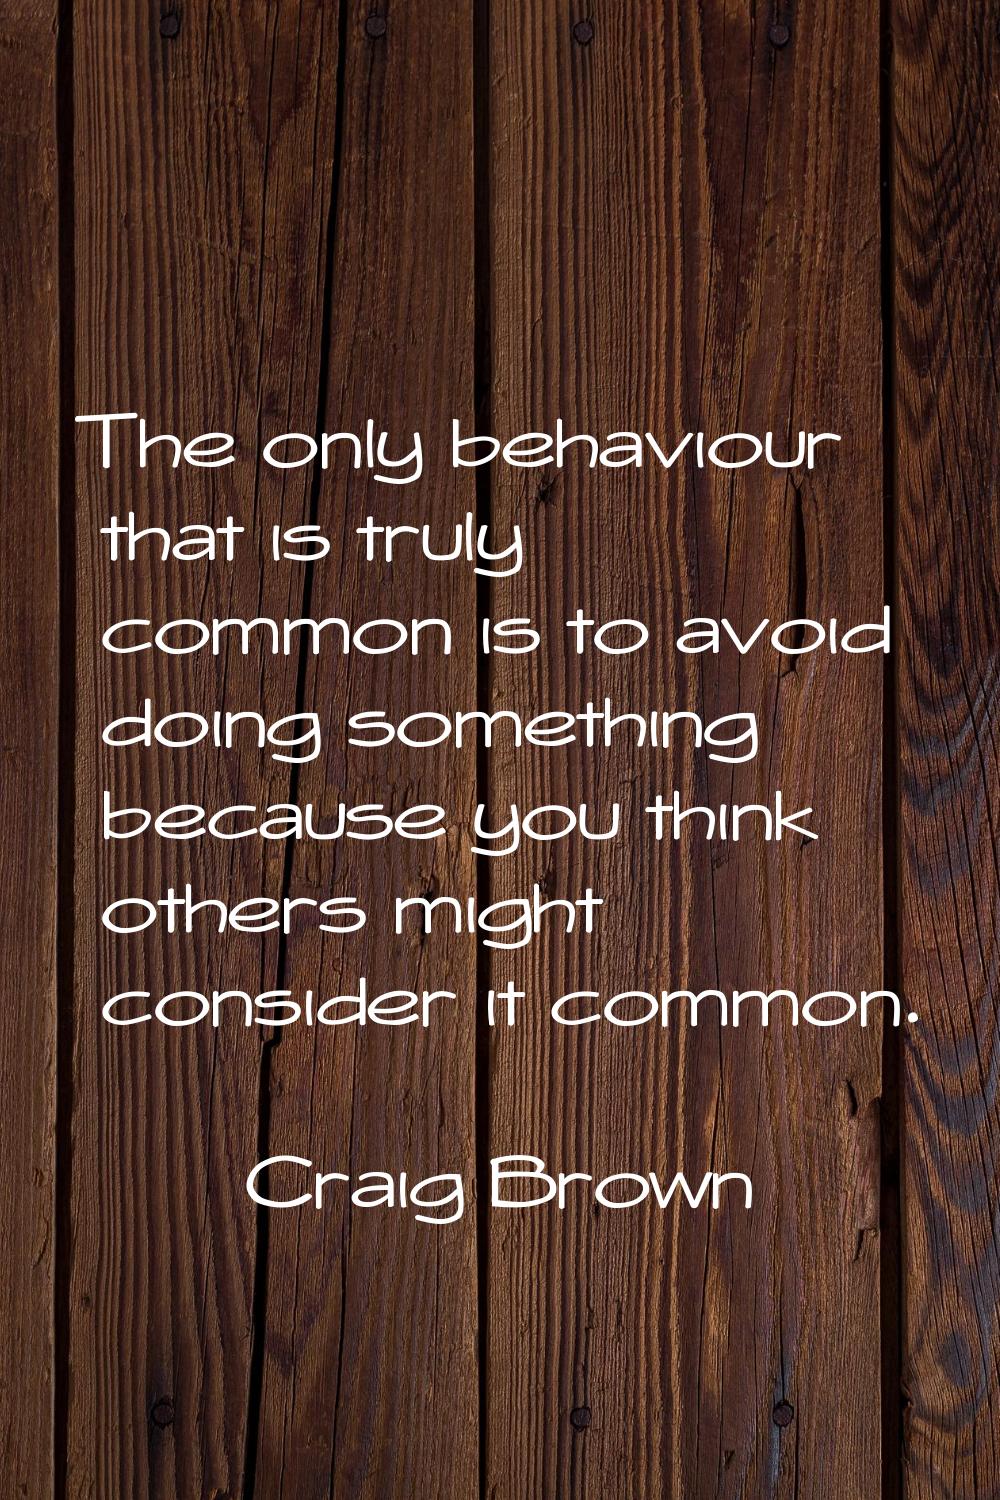 The only behaviour that is truly common is to avoid doing something because you think others might 